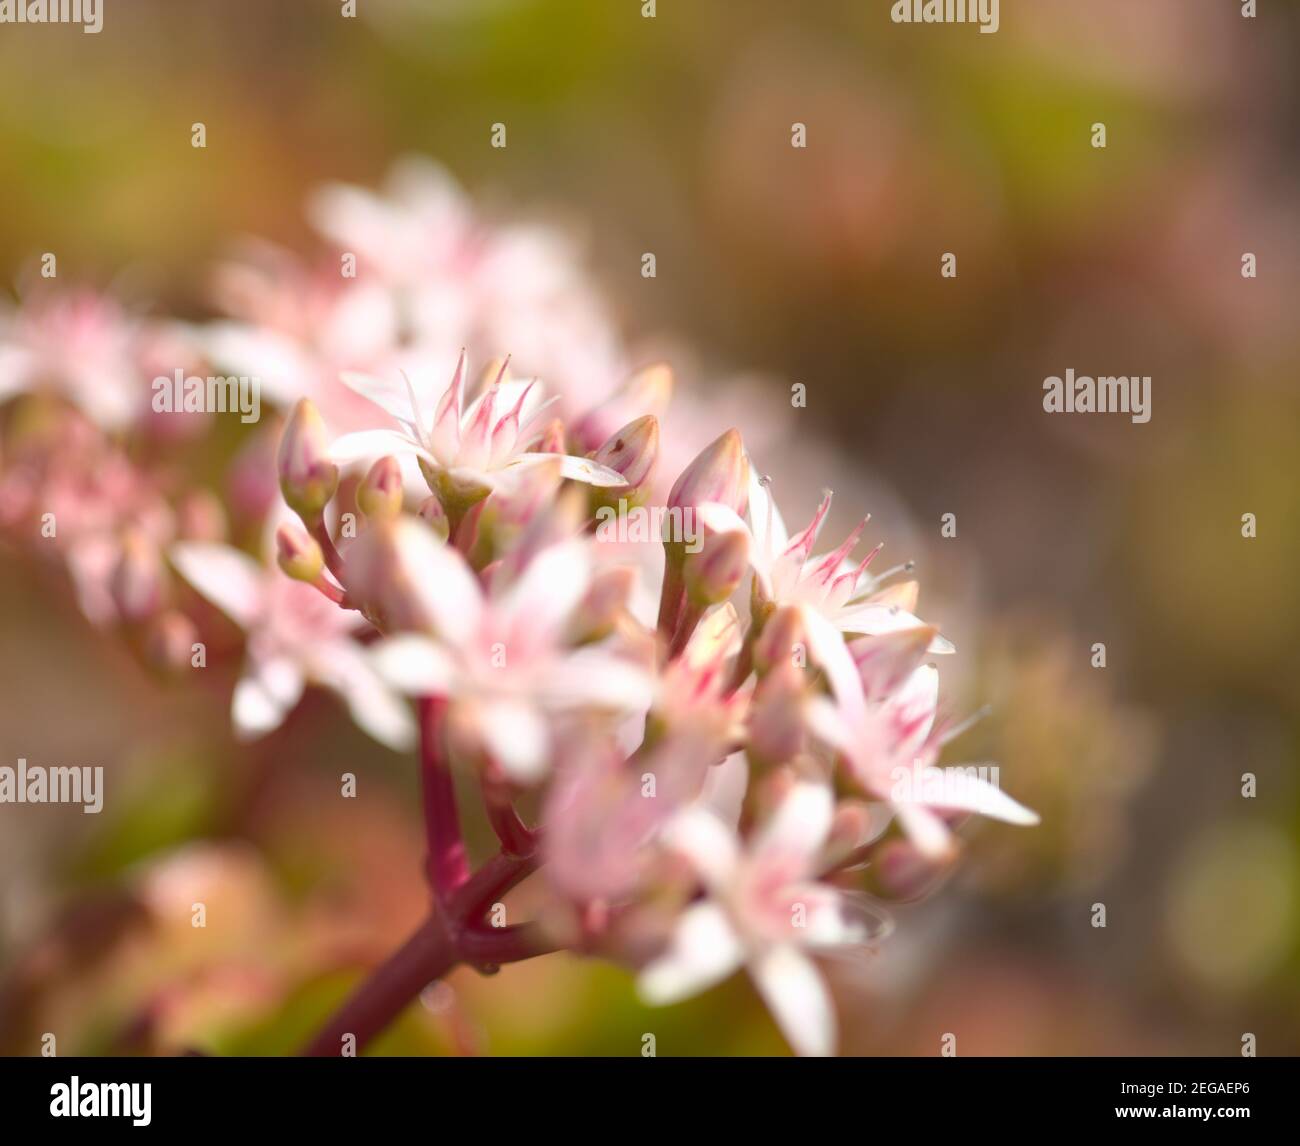 Small pink and red flowers of Crassula ovata, money tree, natural floral background Stock Photo